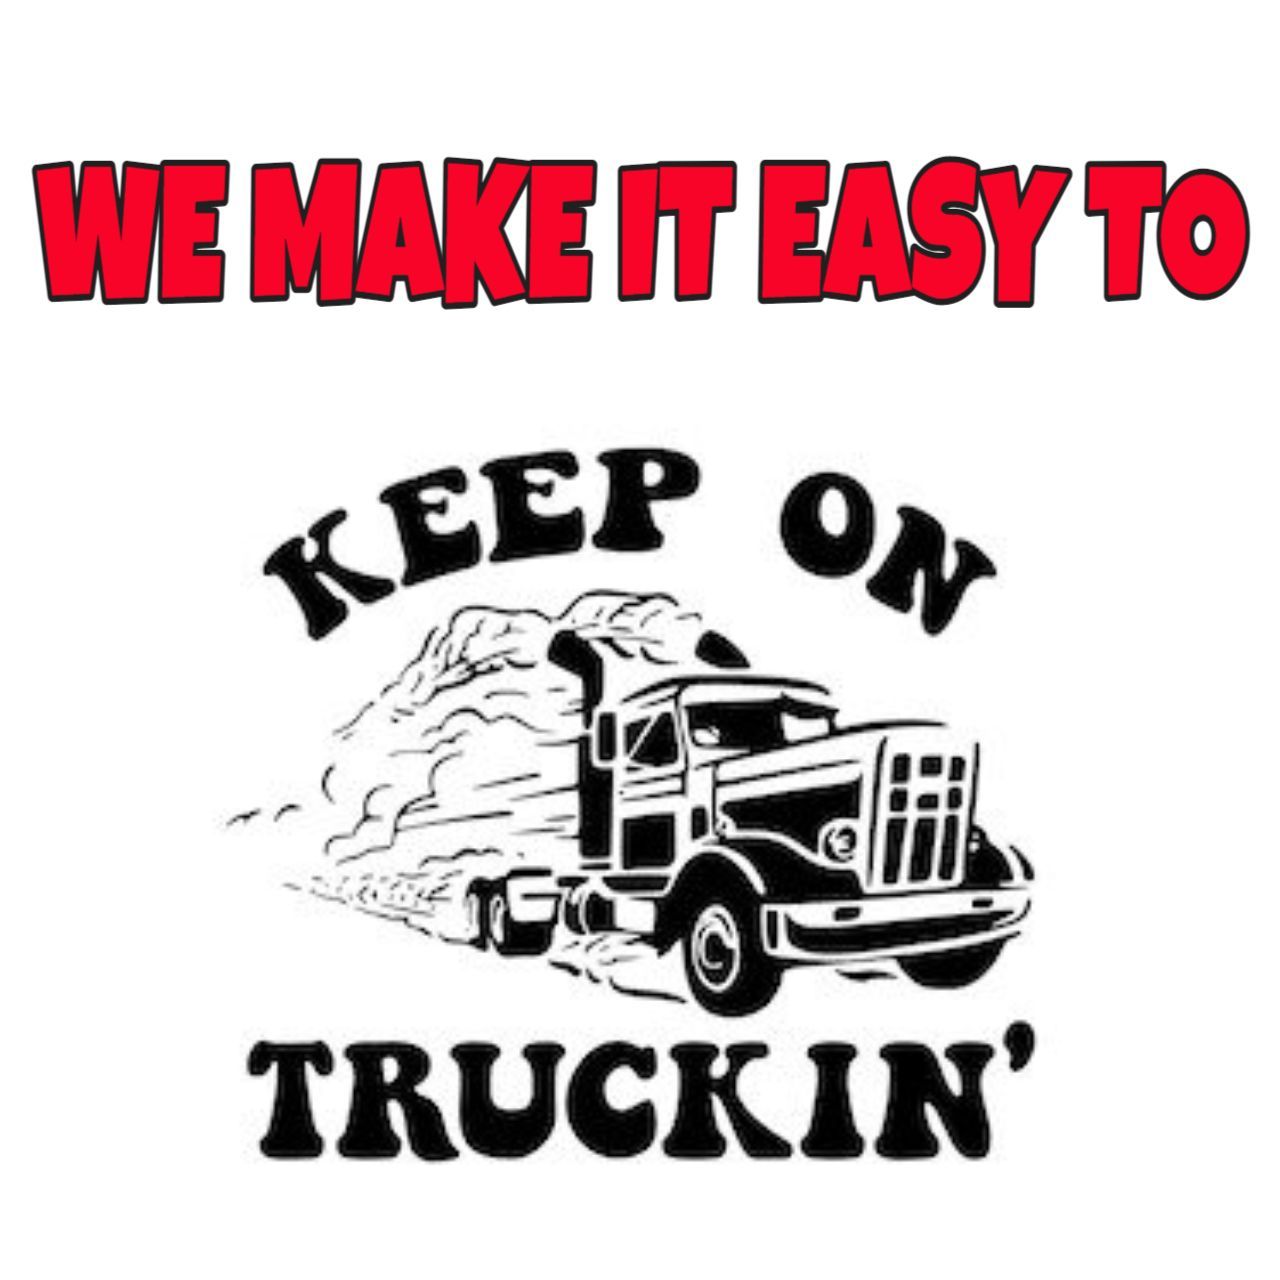 a sign that says we make it easy to keep on truckin '